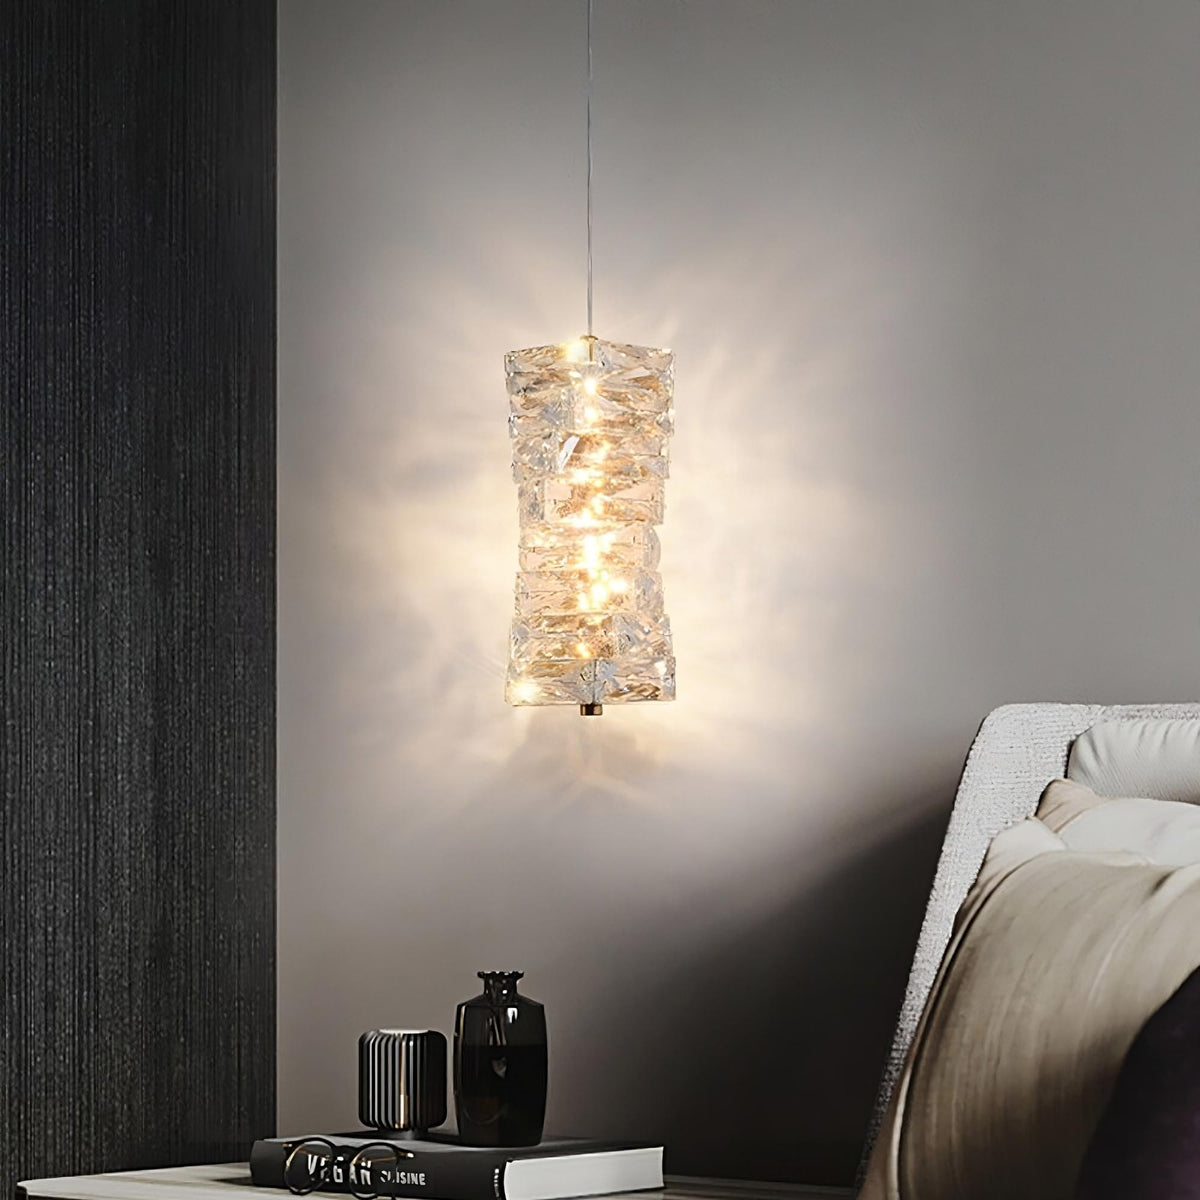 A modern, cylindrical **Bacci Crystal Pendant Light Fixture** from **Morsale.com** hangs from the ceiling, casting a warm glow against a grey wall. Below the light, a side table holds a black vase and several stacked books. Part of a cushioned chair is visible on the right side of the image.